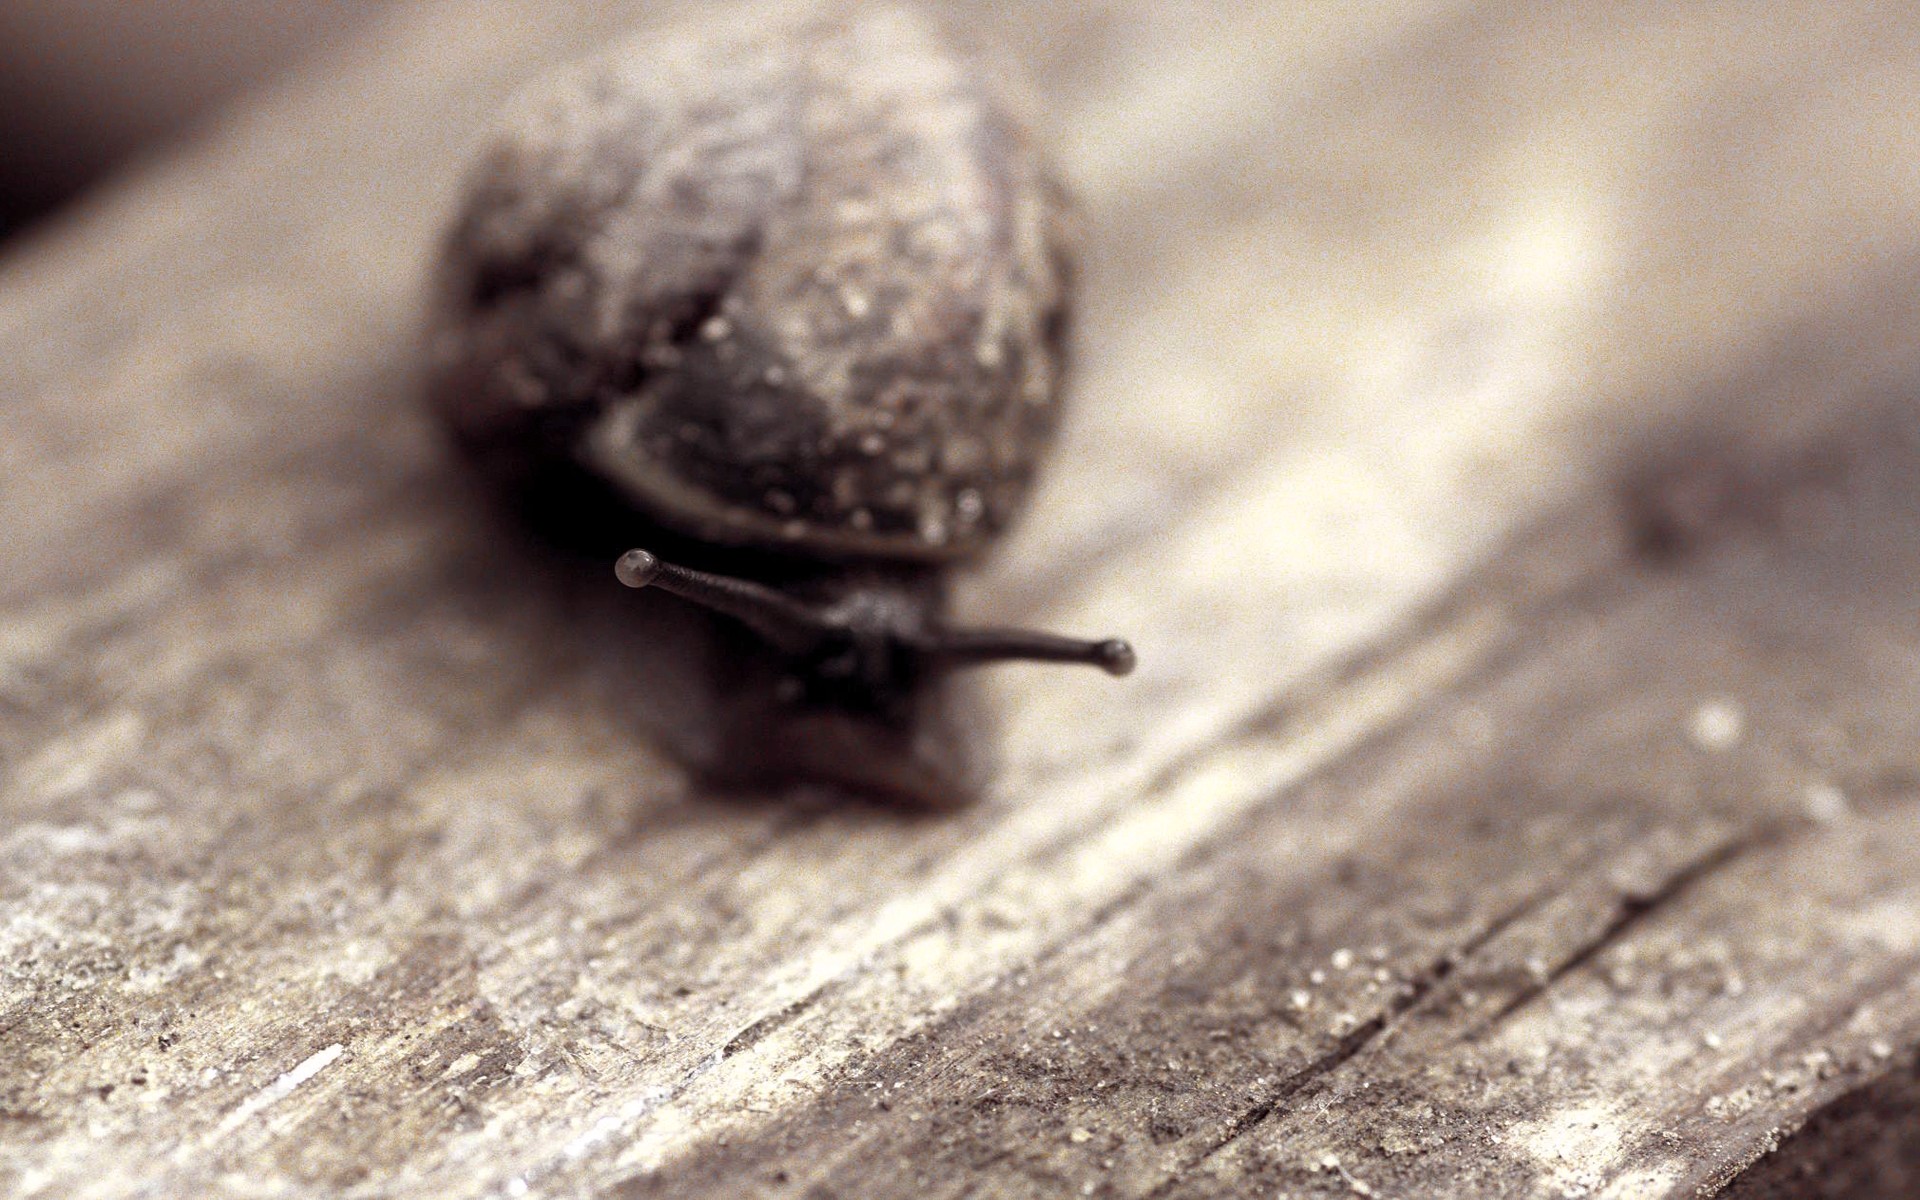 General 1920x1200 snail macro animals sepia wooden surface brown